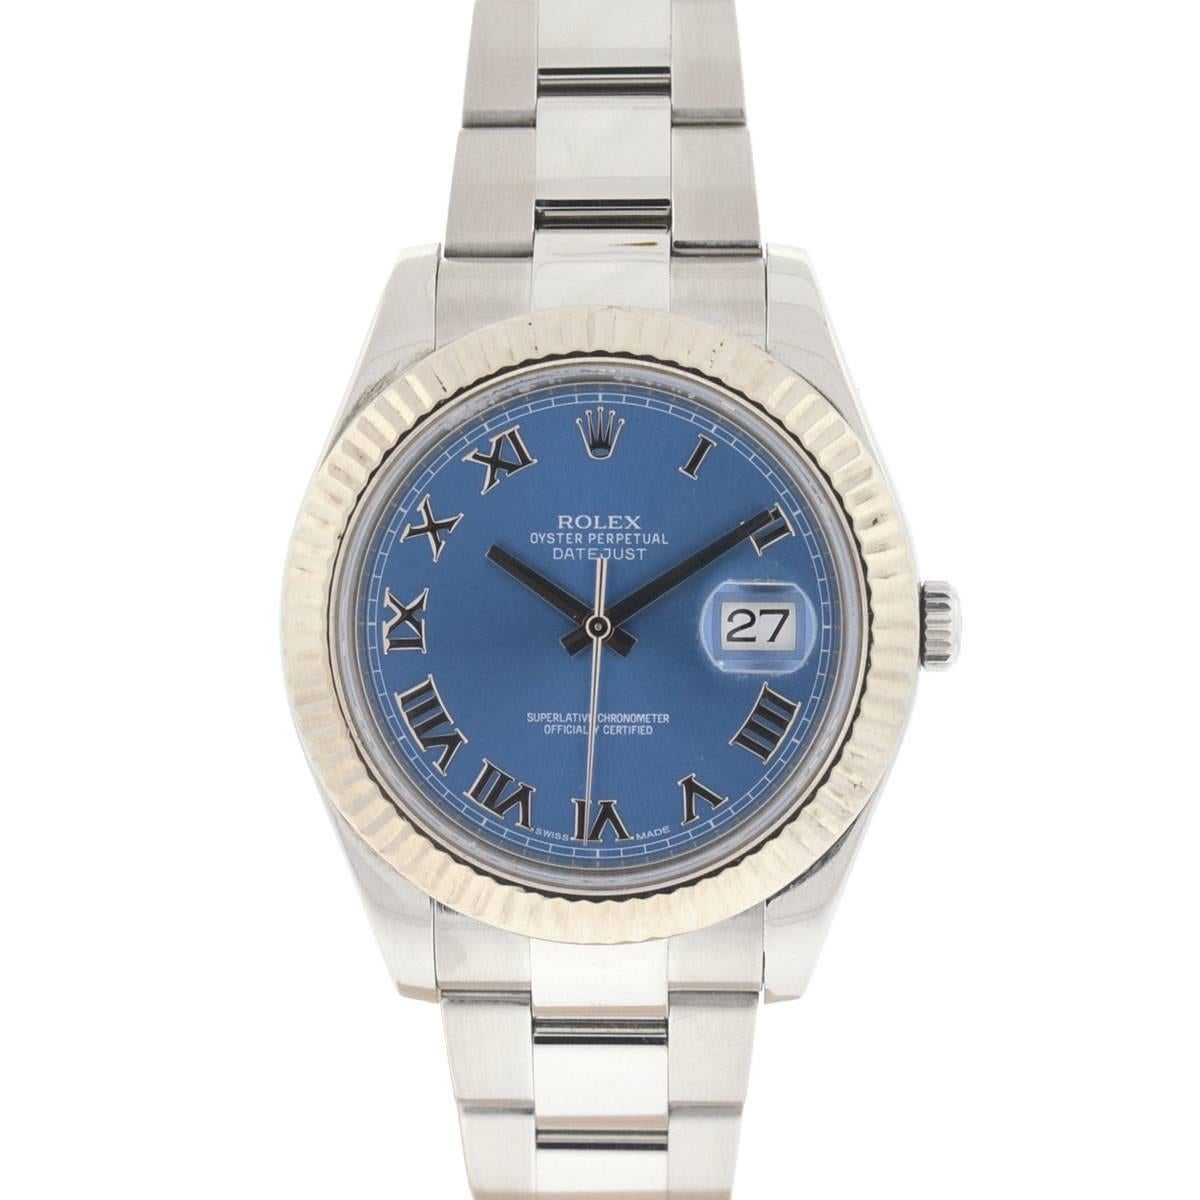 Rolex 116334 Datejust II Blue Dial Stainless Steel Automatic Watch